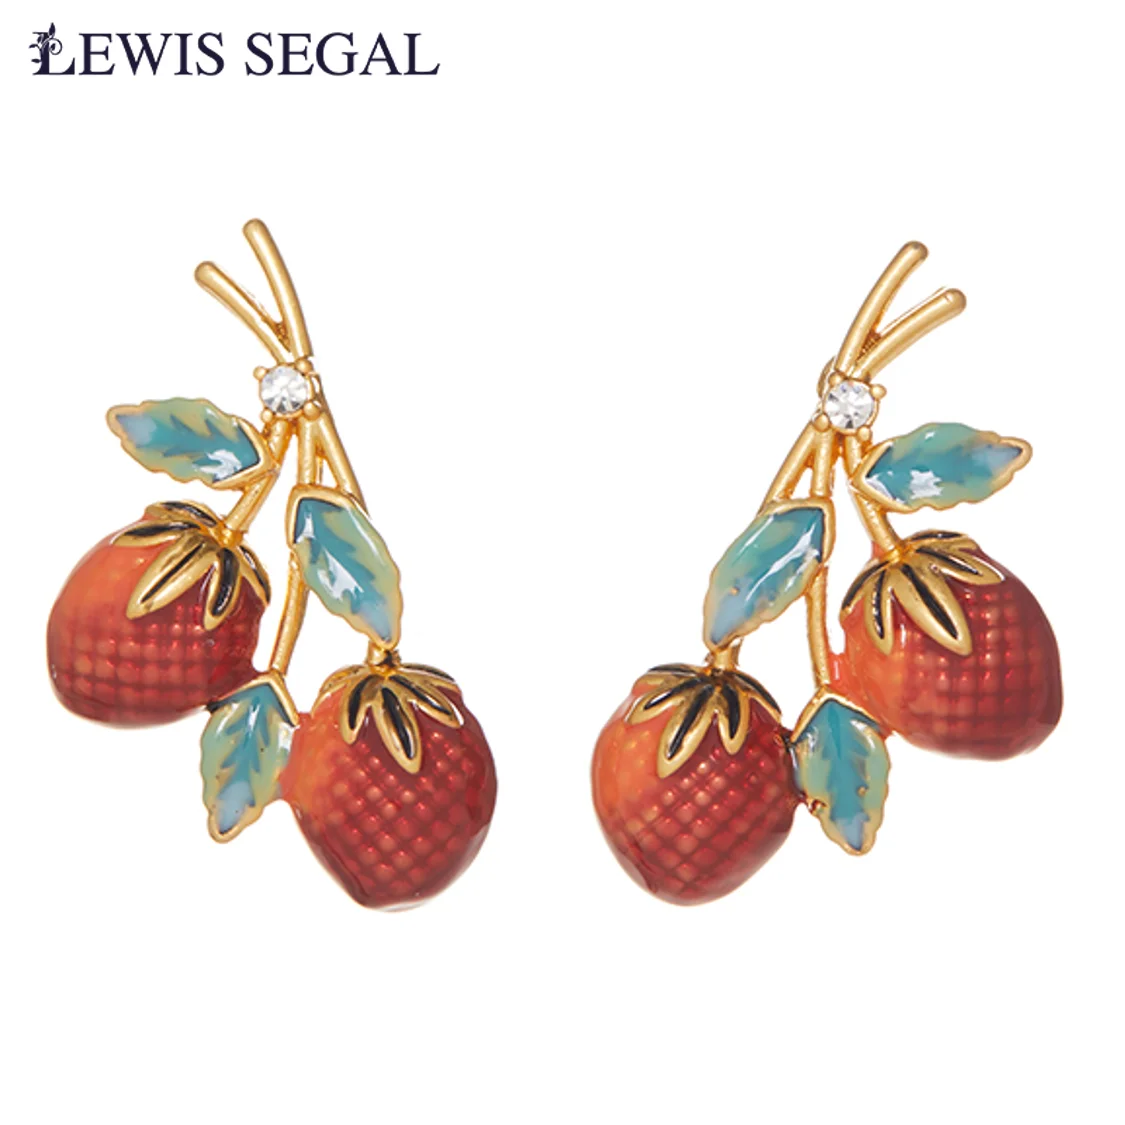 

LEWIS SEGAL Strawberry with leaves Enamel Earrings for Women Sparkling Rhinestone Vintage Fine Jewelry 18K Gold Plated